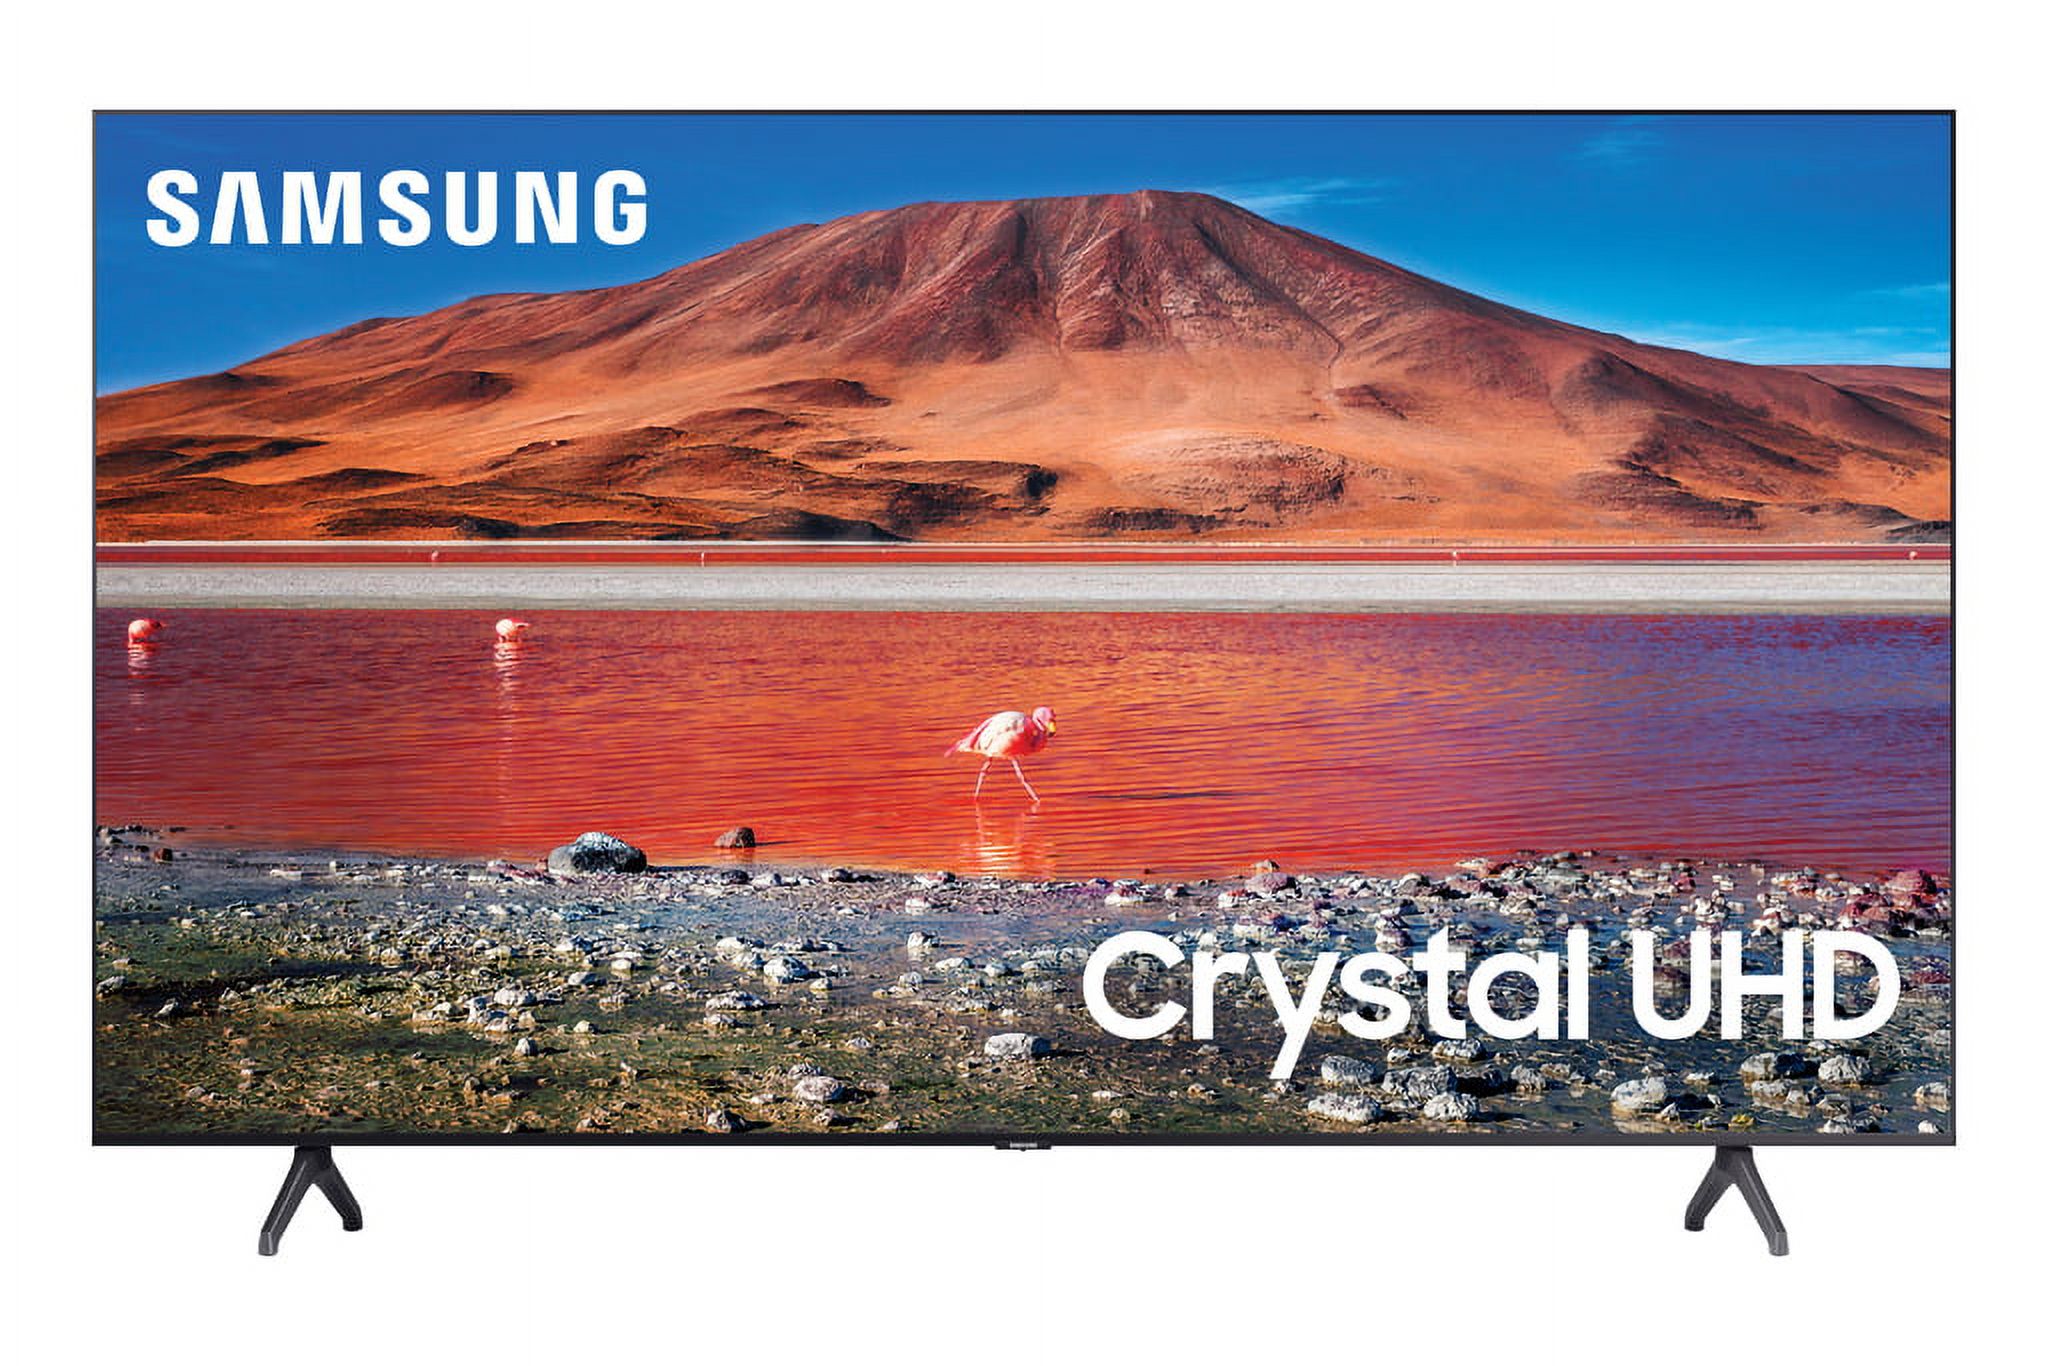 SAMSUNG 70" Class 4K Crystal UHD (2160P) LED Smart TV with HDR UN70TU7000 2020 - image 1 of 18